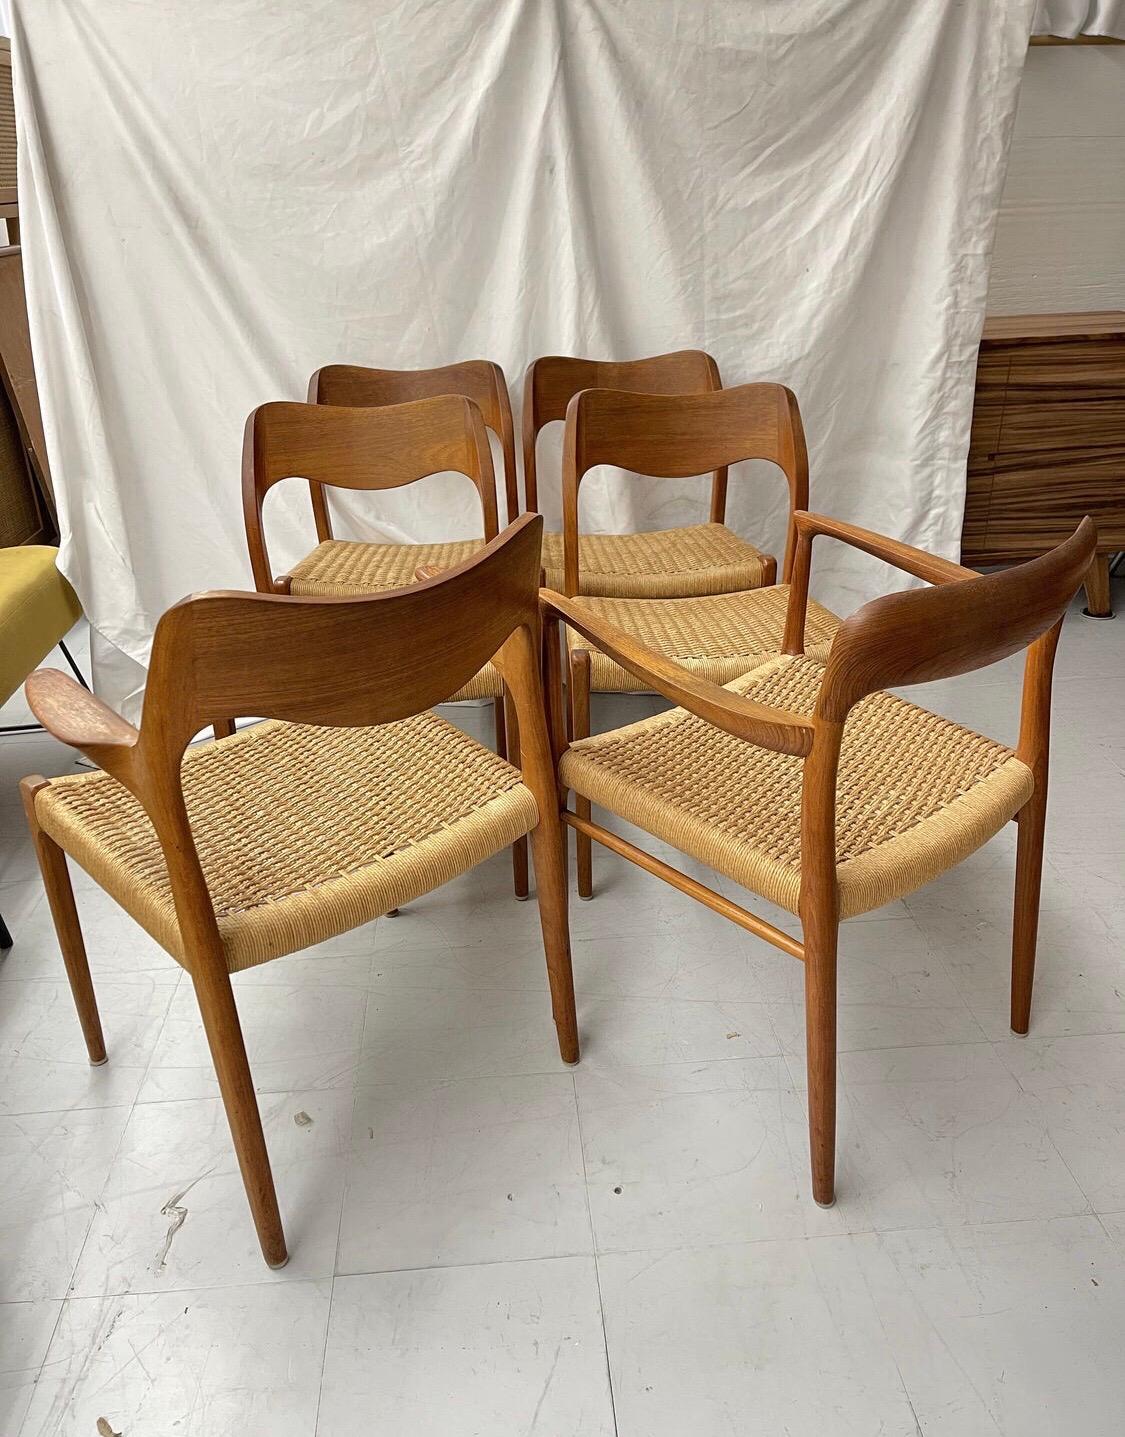 1960s Danish Modern Jl Moller Chairs with Caning, Set of 6 1